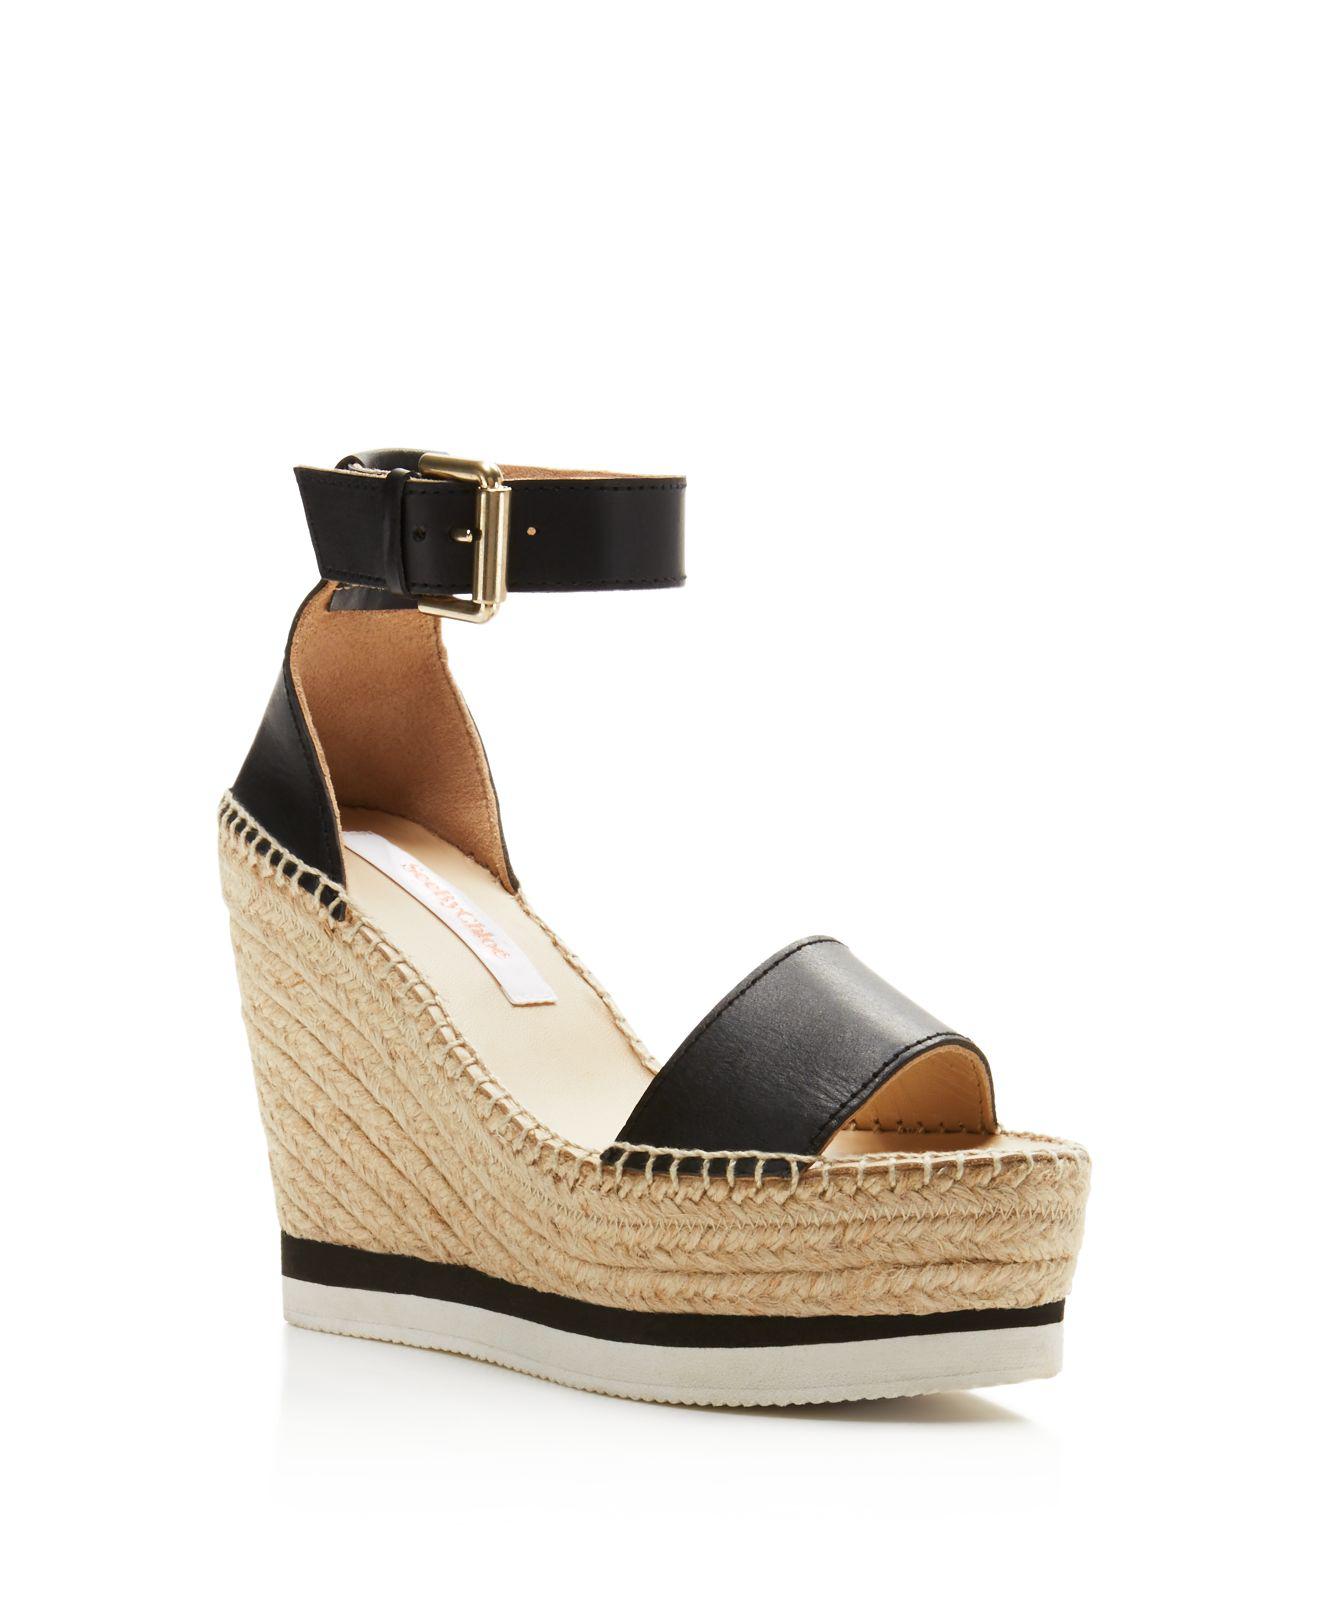 Lyst - See By Chloé Glyn Leather Espadrille Platform Wedge Ankle Strap ...